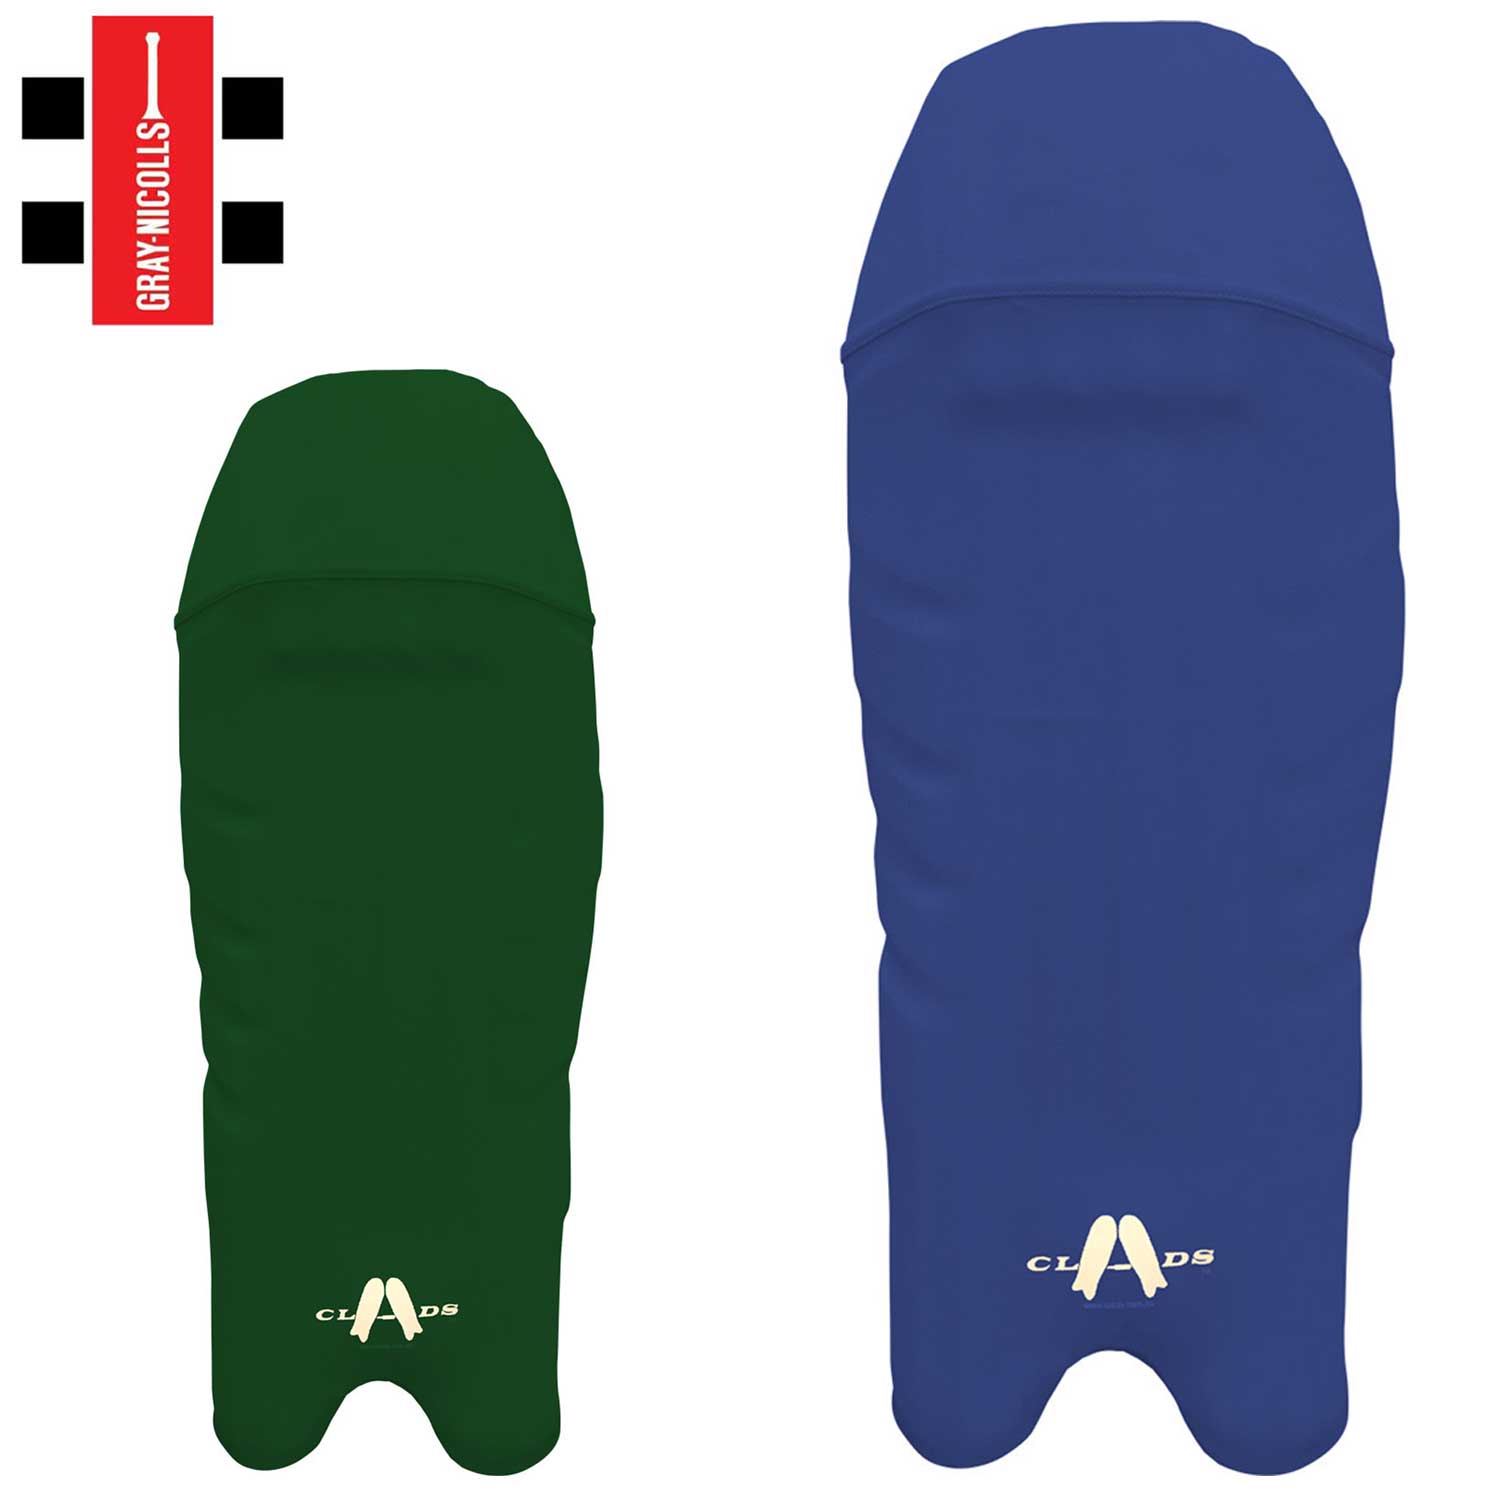 Clads - Cricket Wicket Keeping Pad Covers